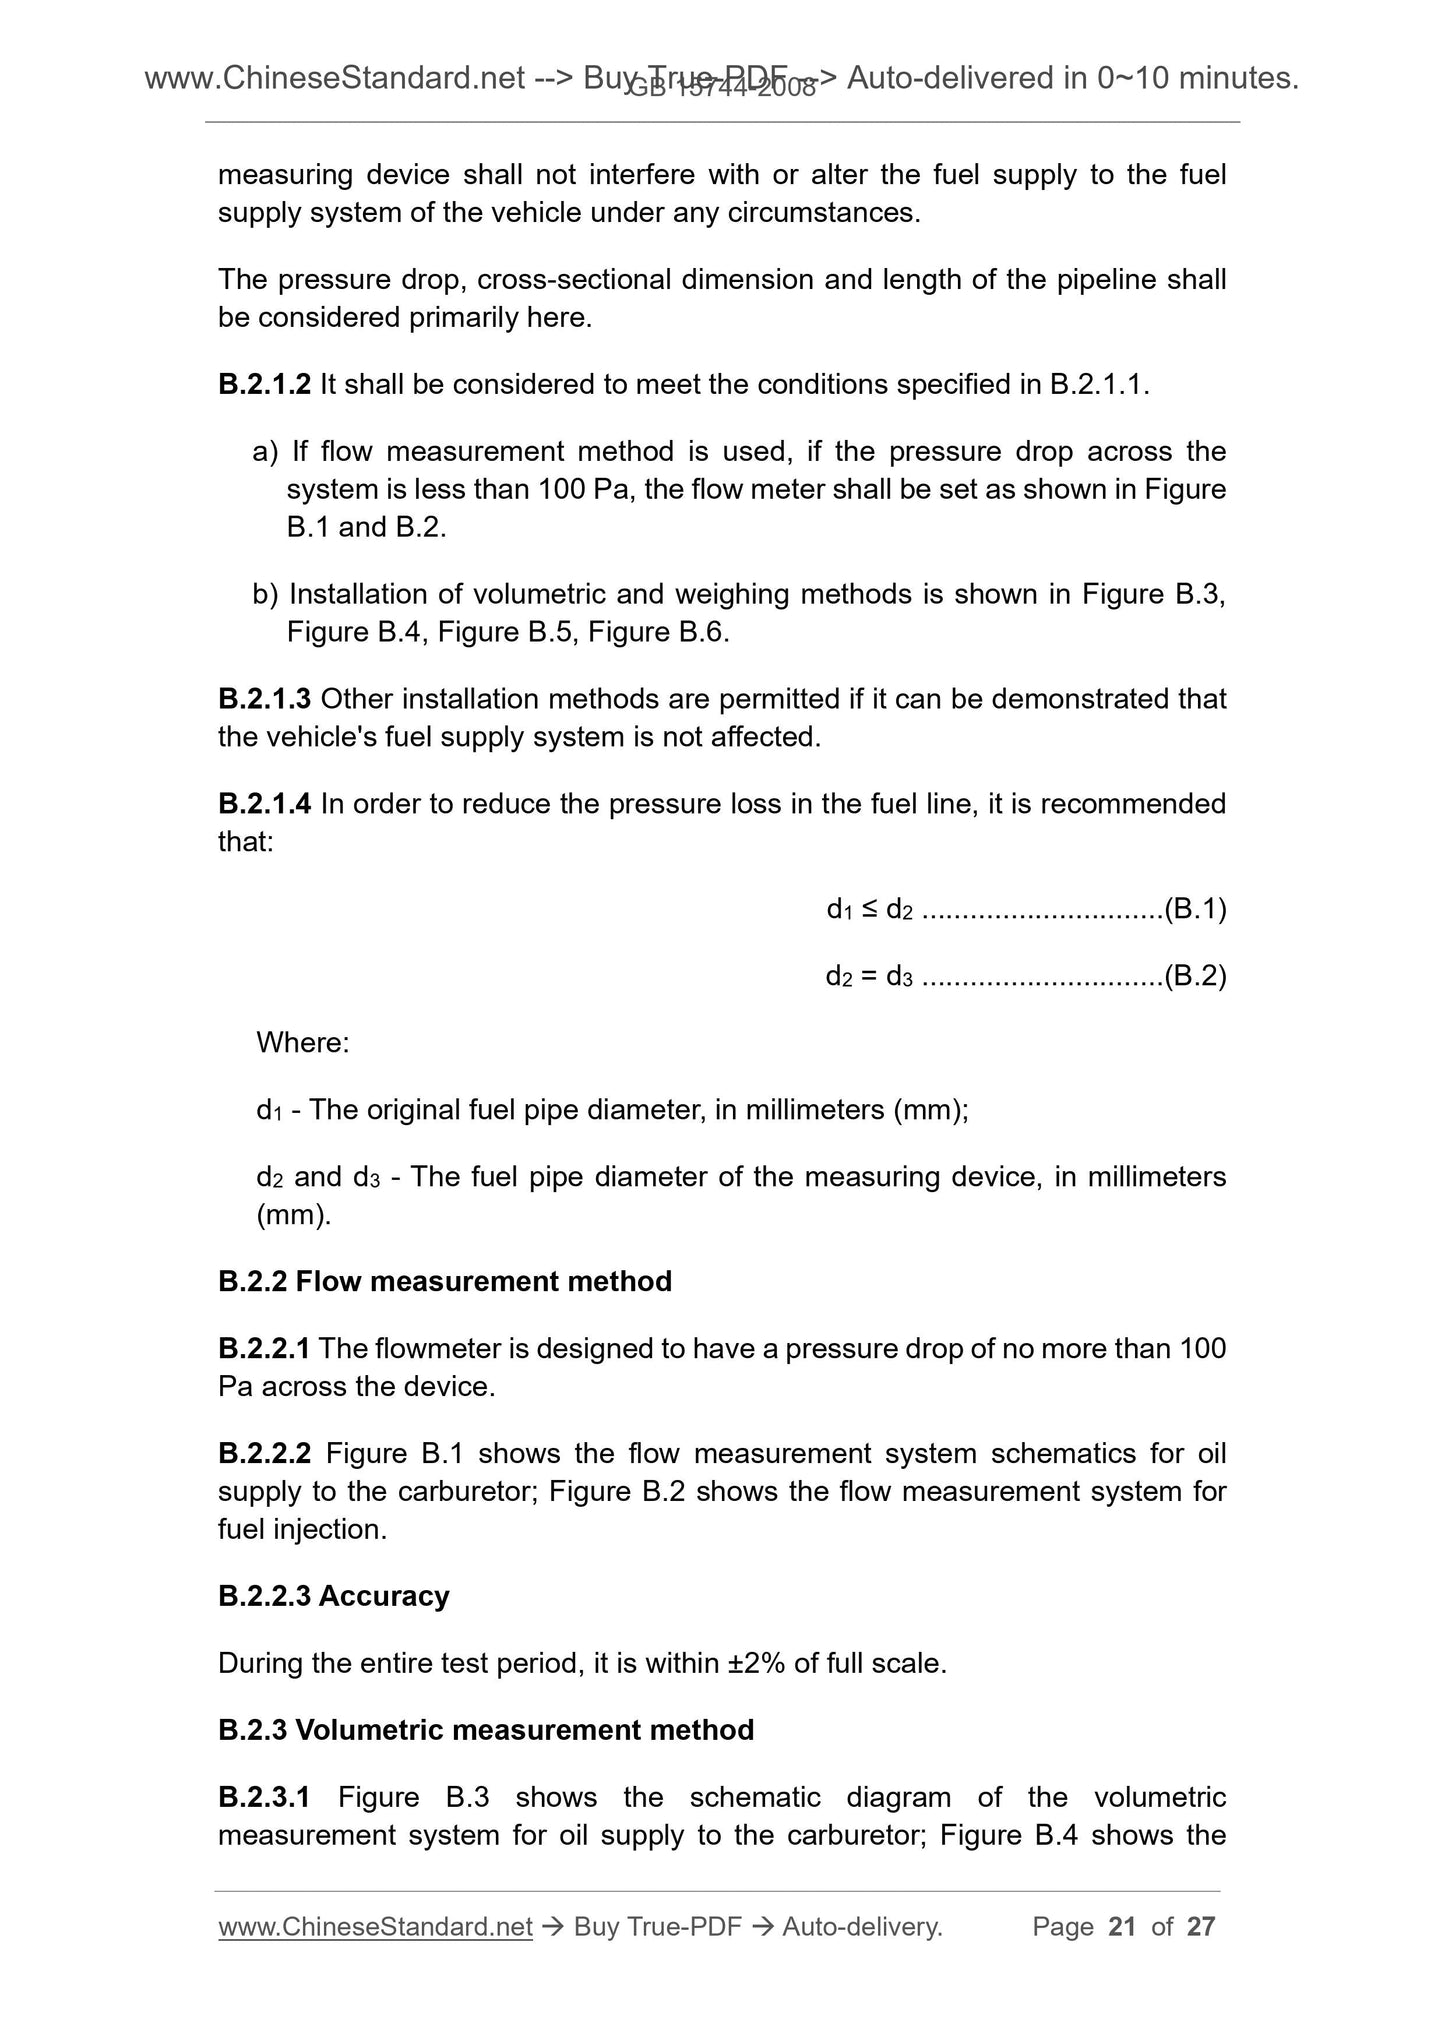 GB 15744-2008 Page 8